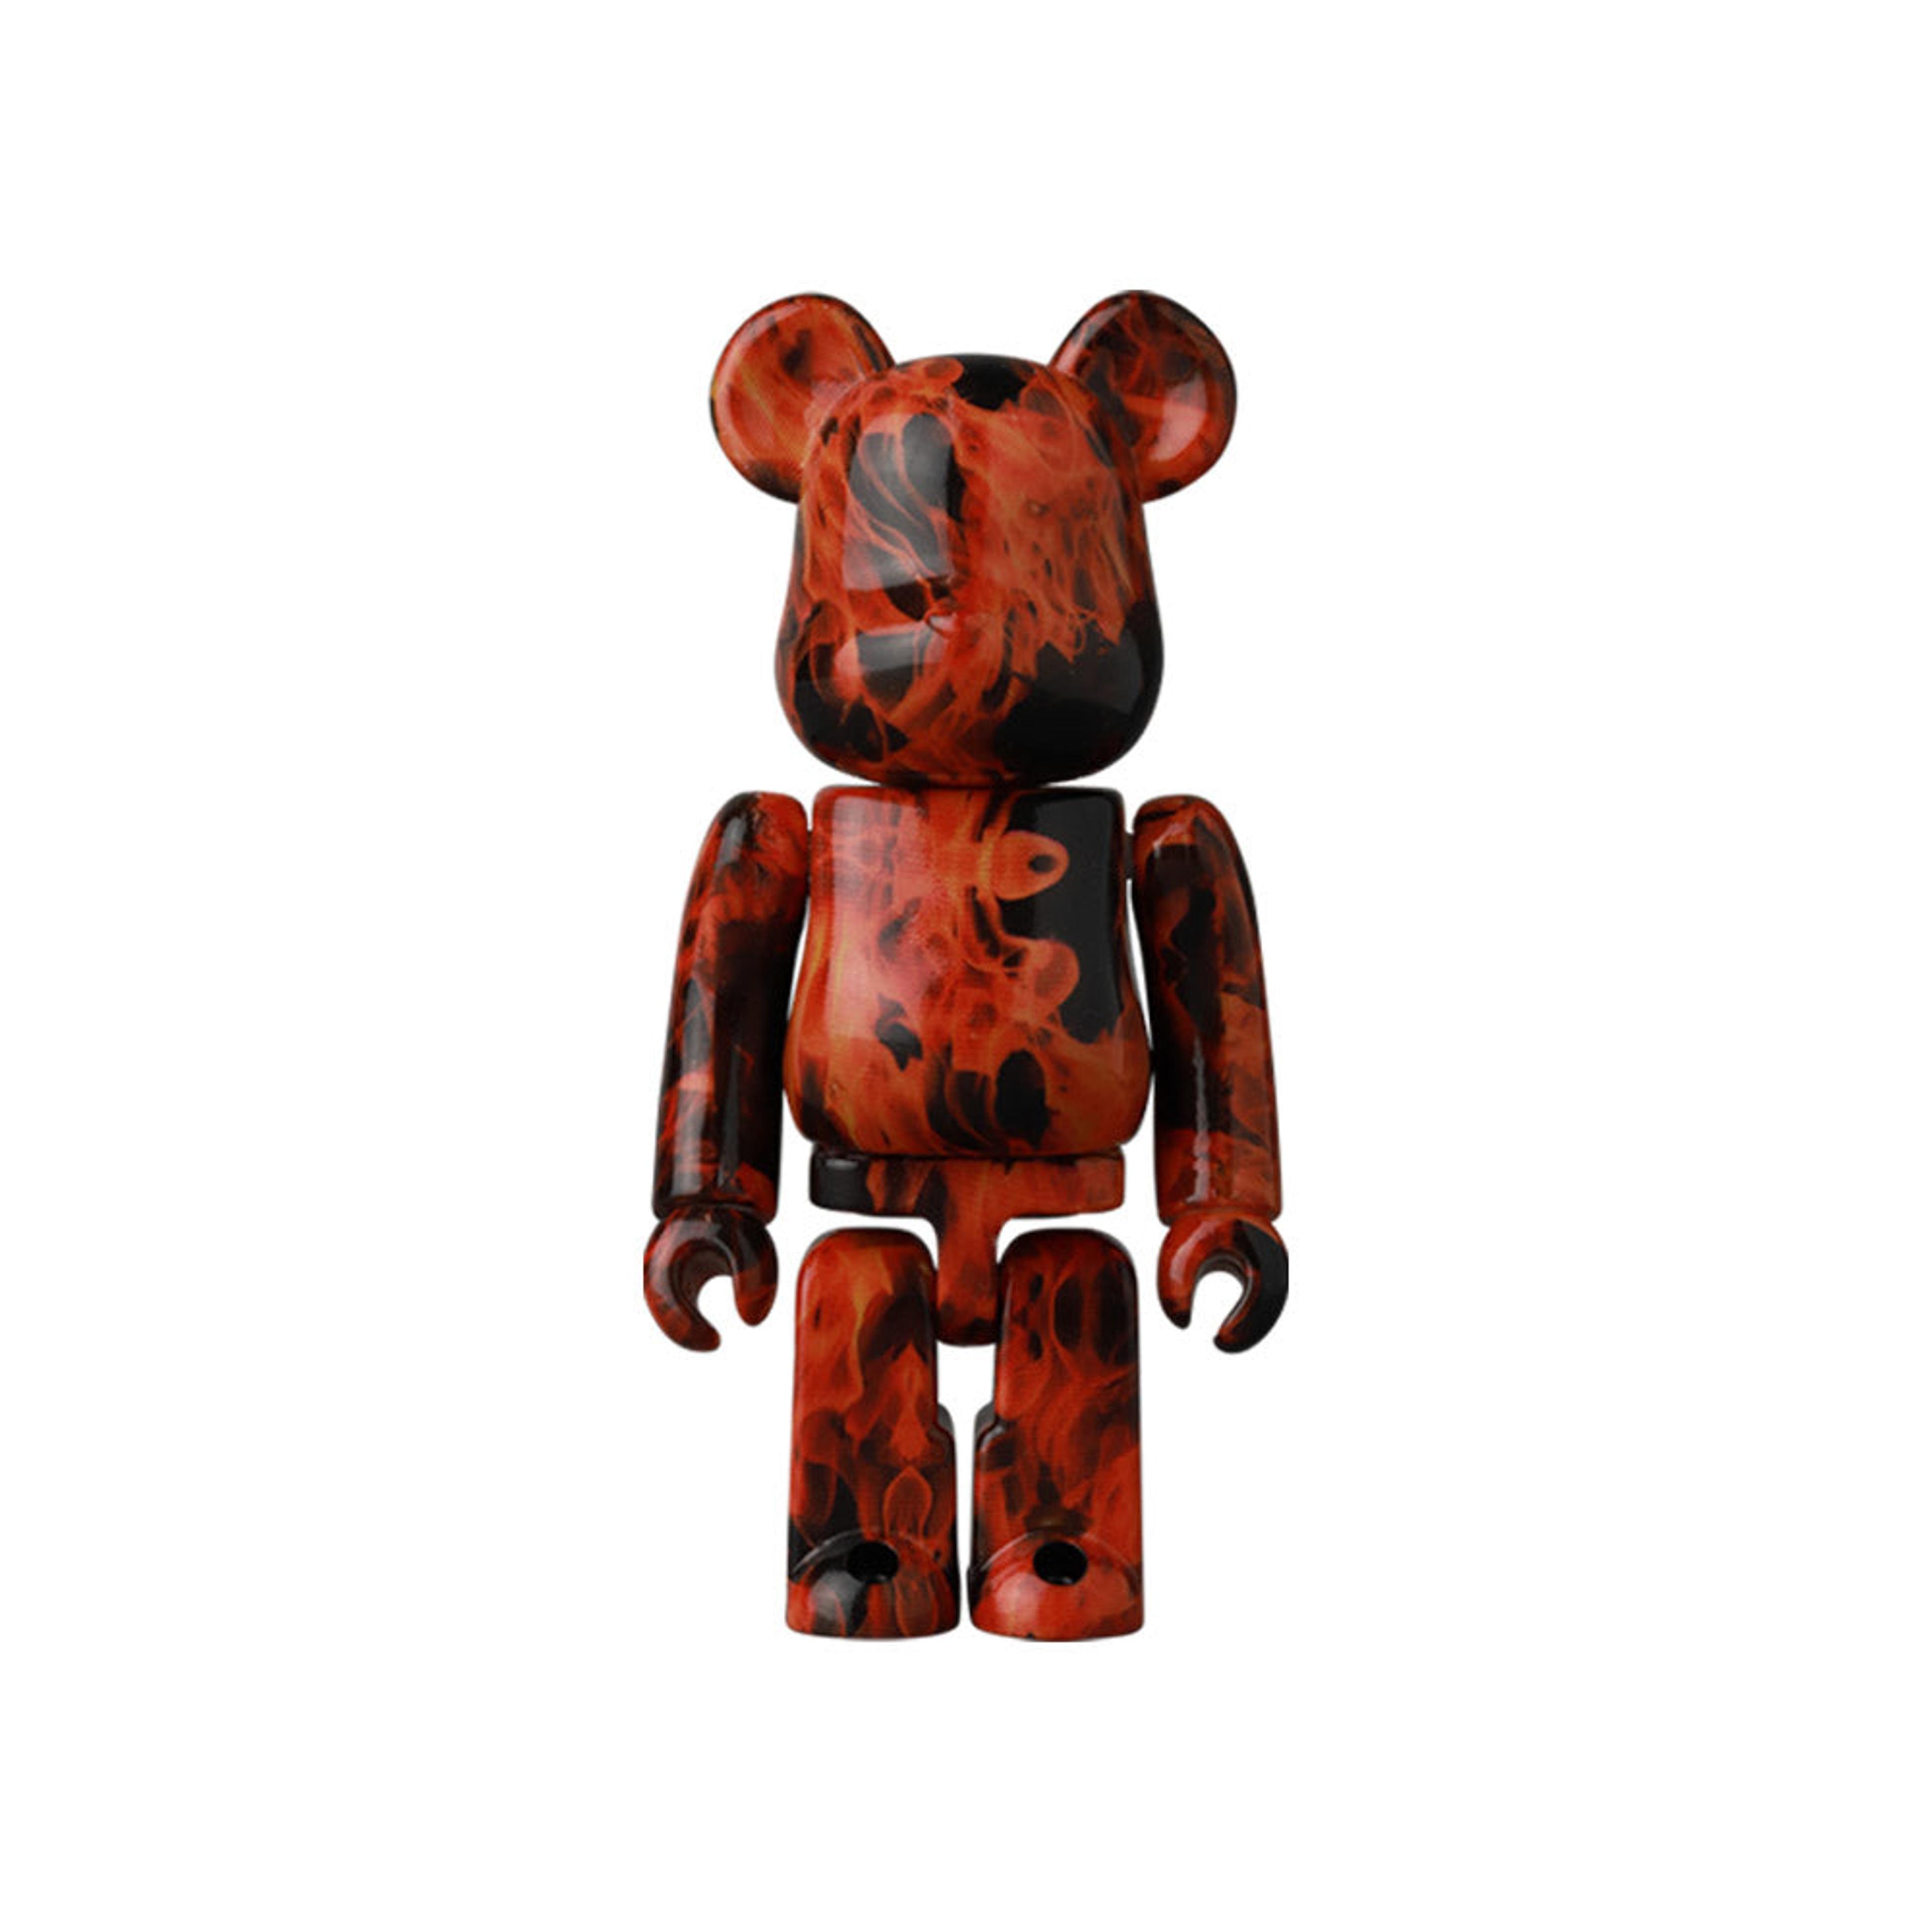 Alternate View 4 of Bearbrick Series 44 Display Case (24 Blind Boxes) by Medicom Toy